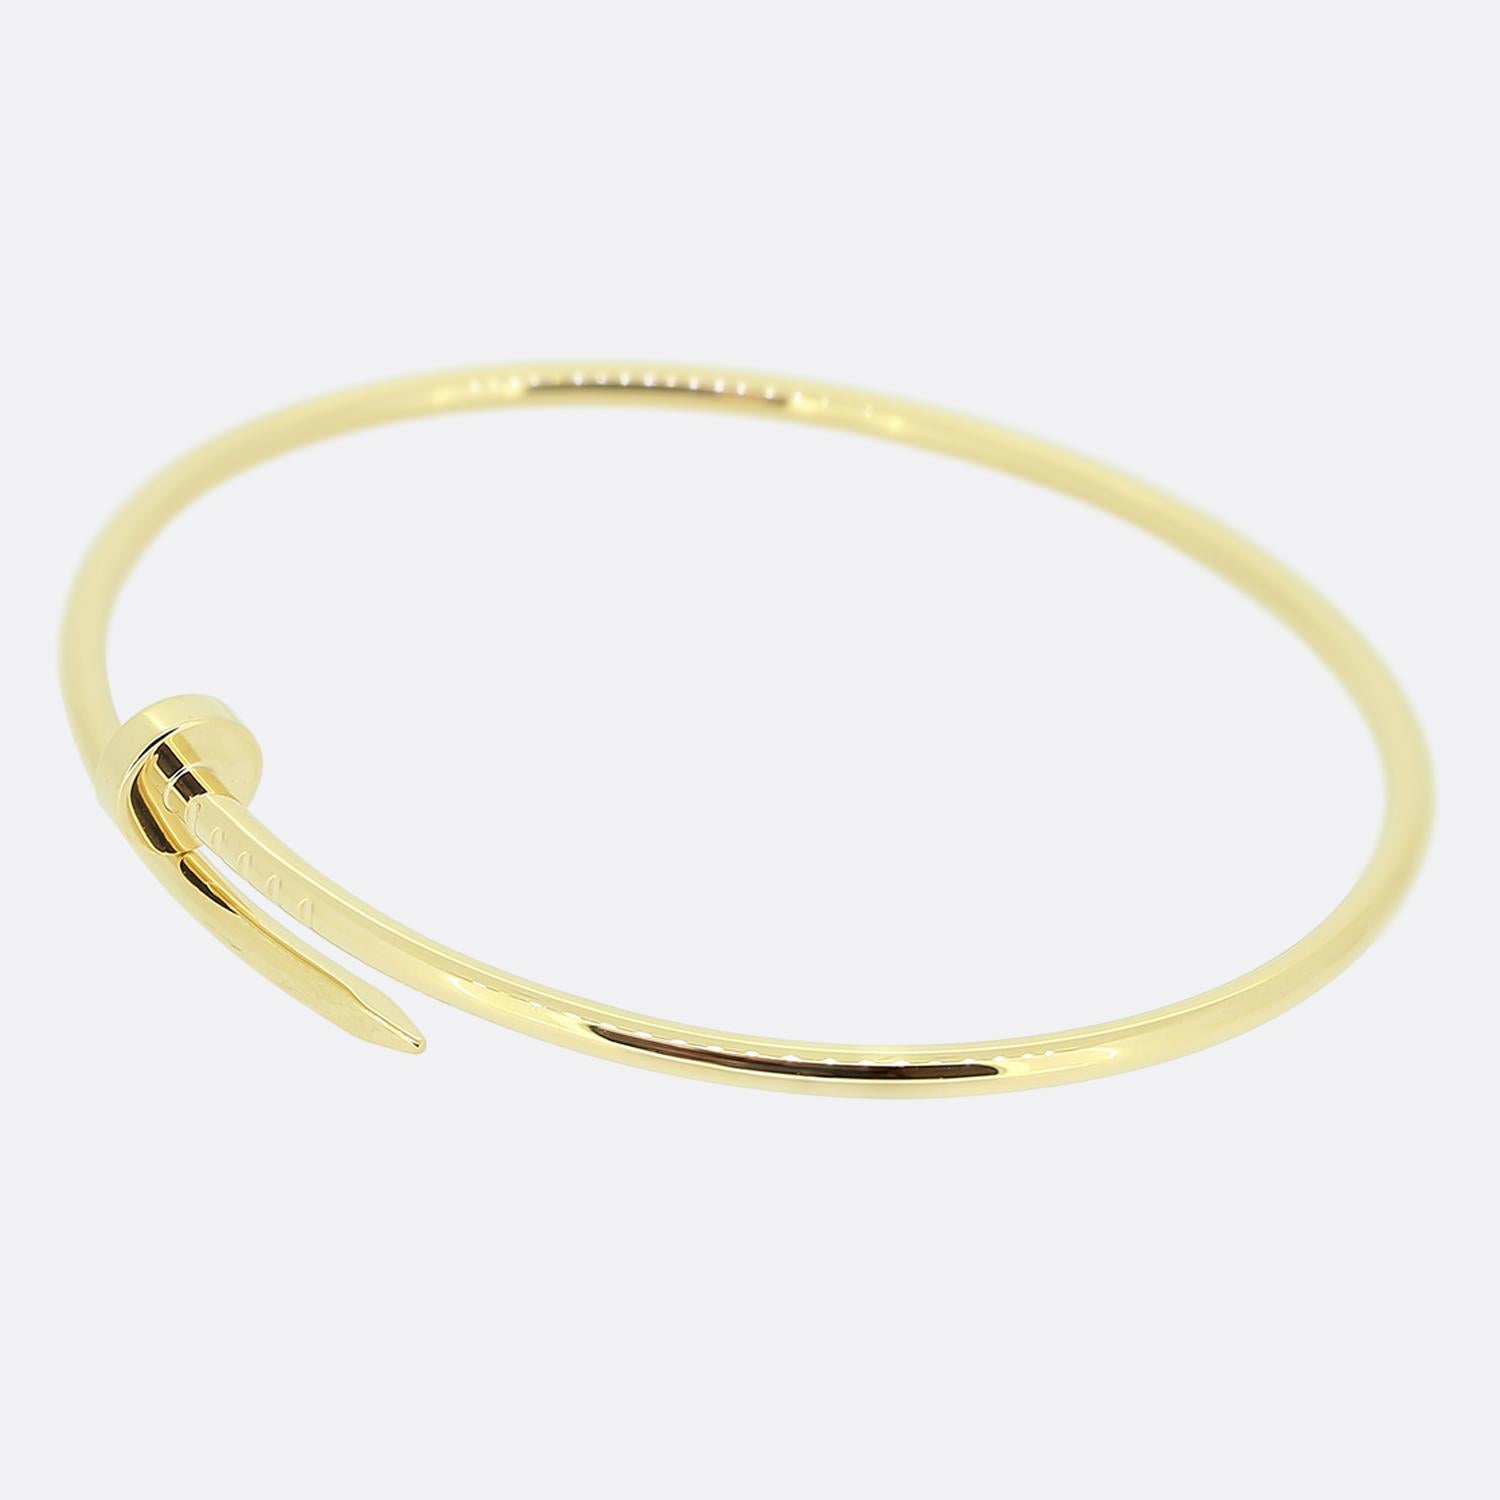 Here we have an 18ct yellow gold bracelet from the luxury jewellery house of Cartier. The particular piece forms part of the world renowned 'Juste un Clou' collection and showcases a wrap-around nail design. This is the small model which allows the